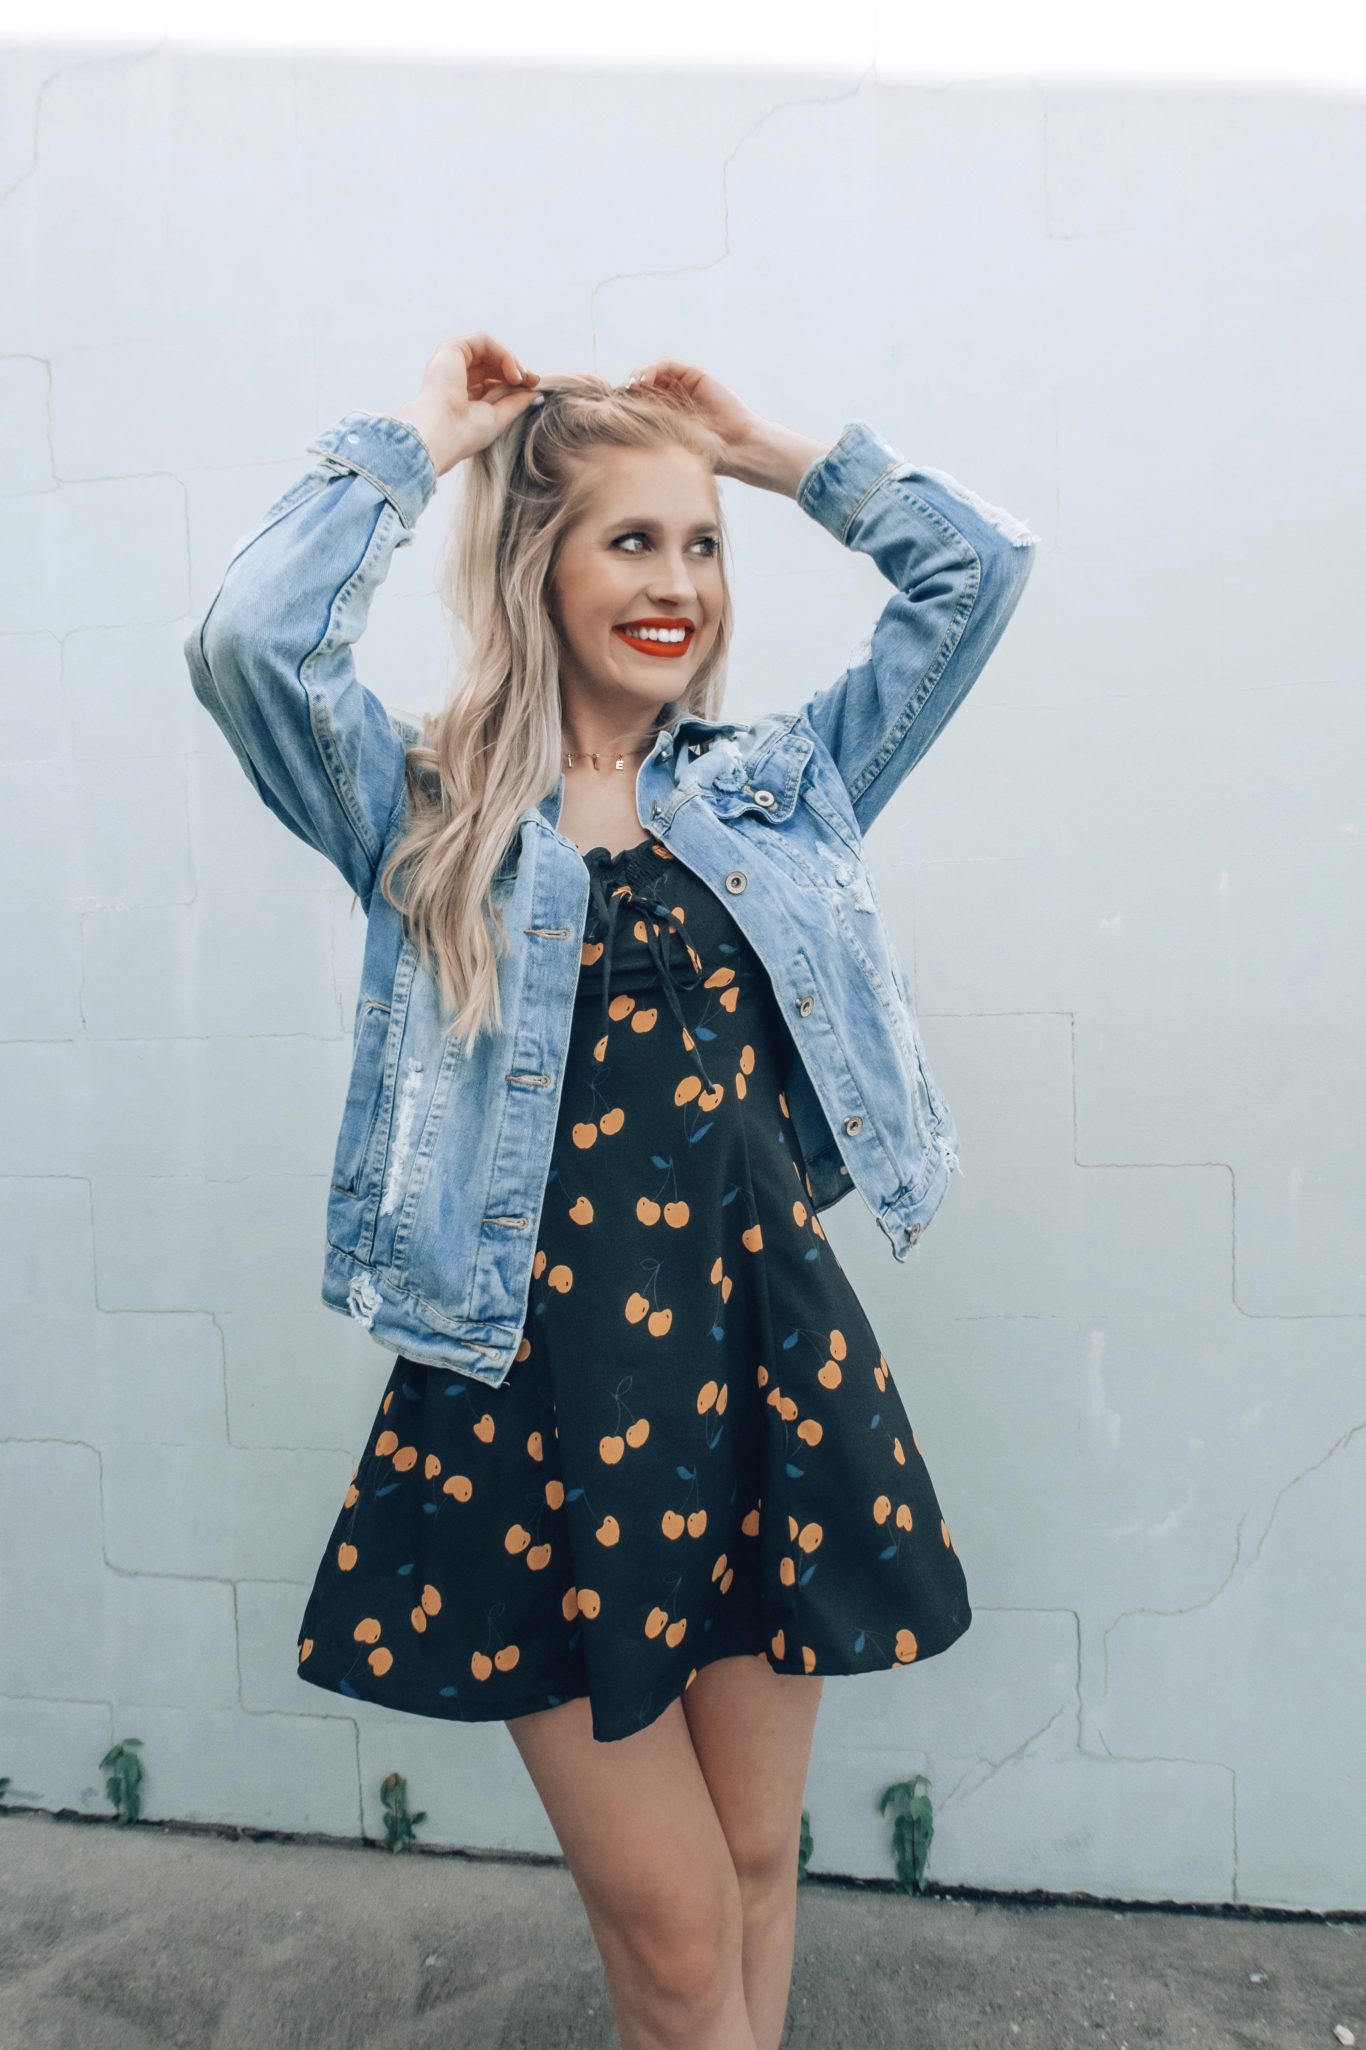 finding-affordable-spring-dresses-on-a-budget-amazon-asos-shop-the-mint-style-fashionable-denim-jacket-distresses-rutched-dress-embroidered-03